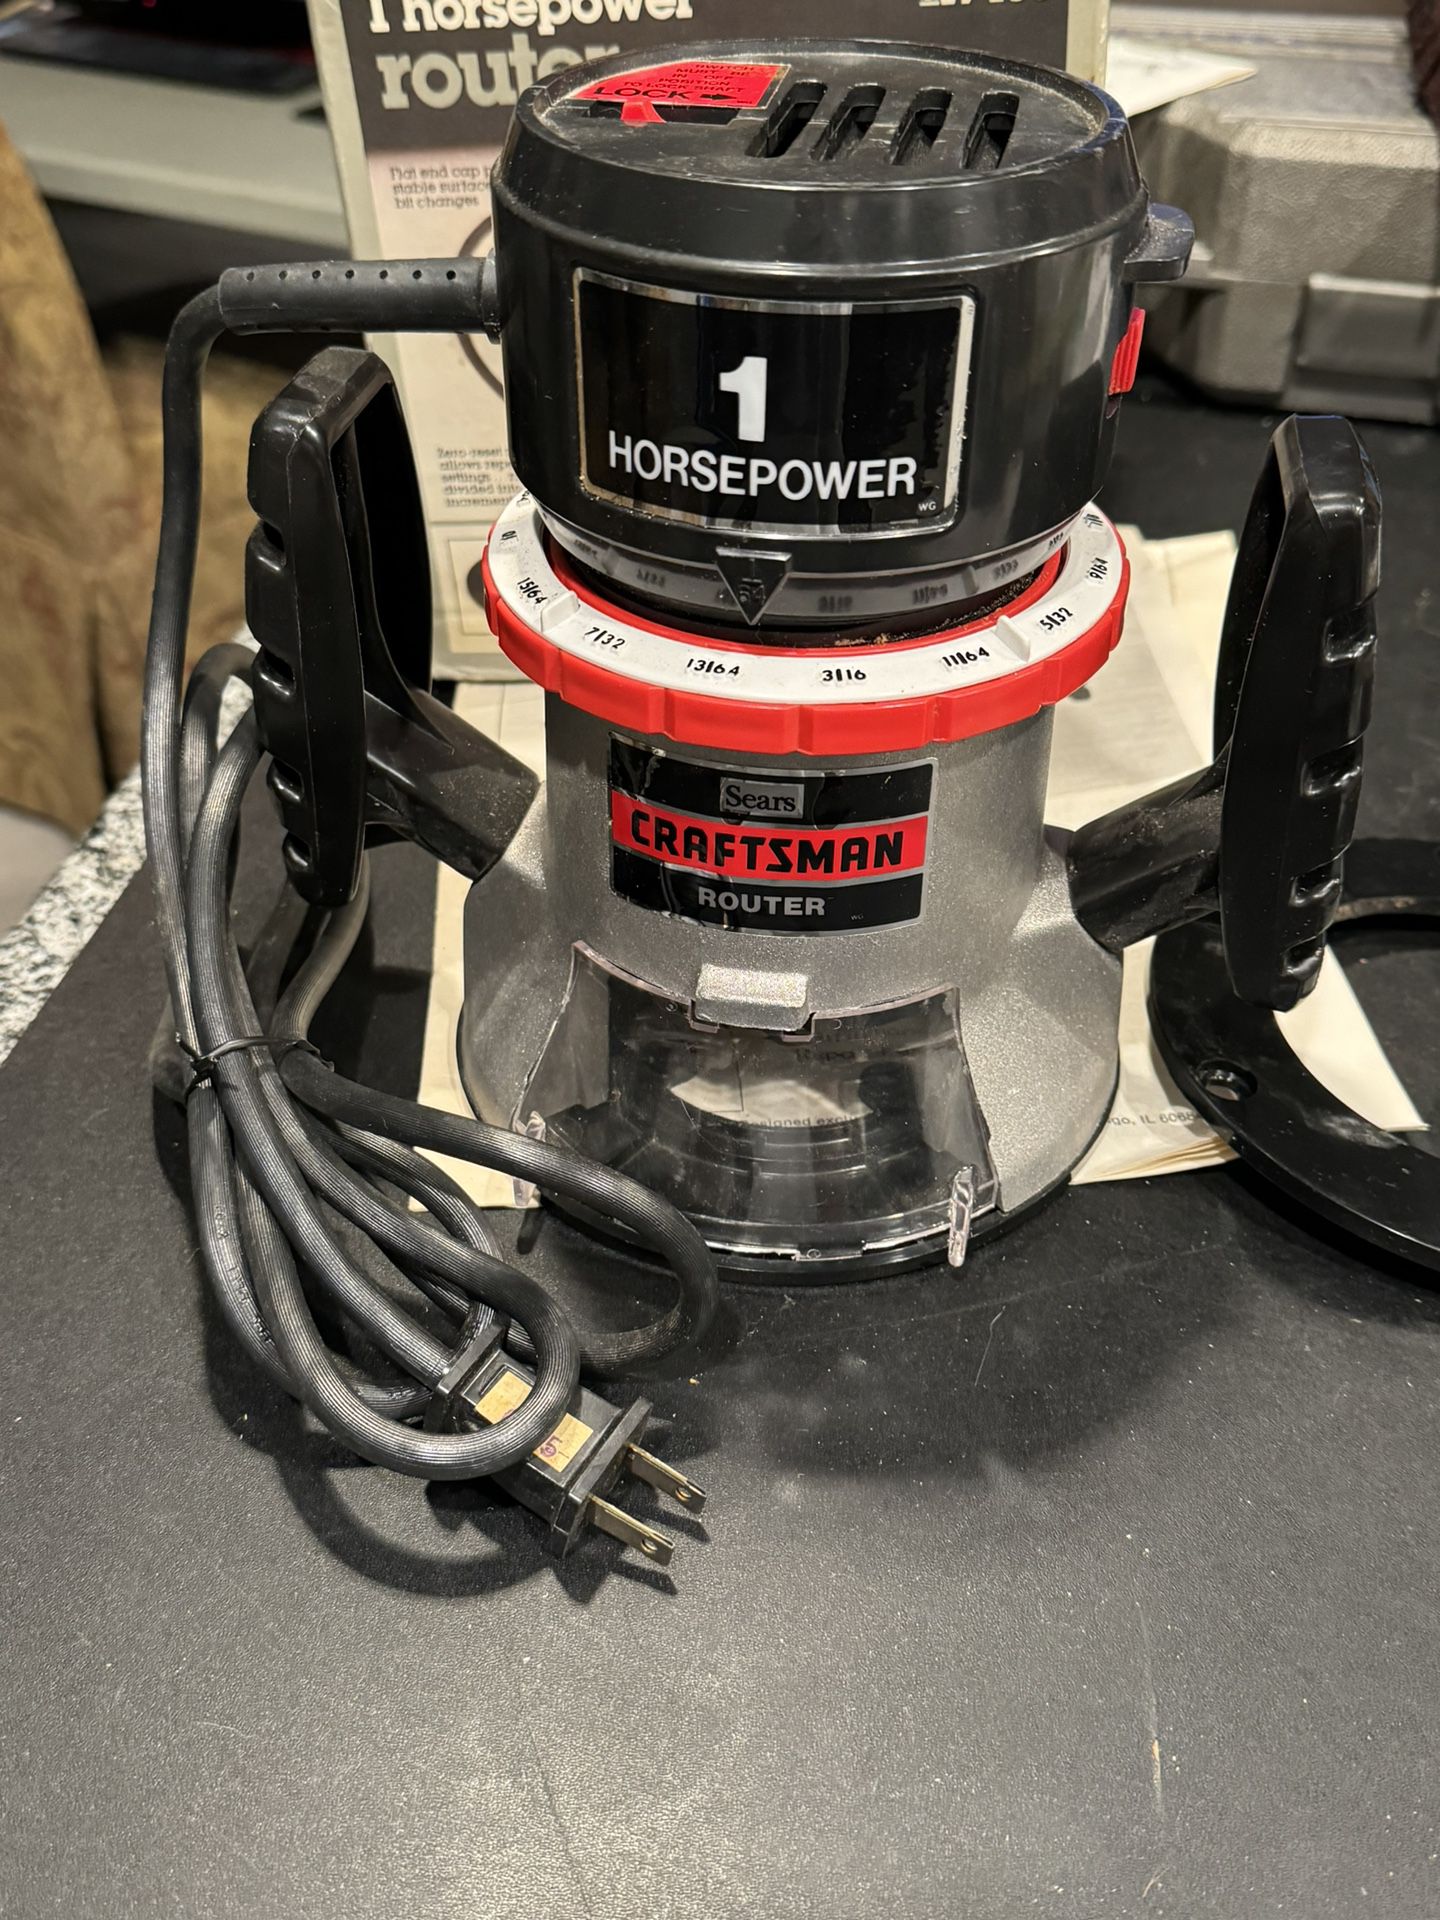 CRAFTSMAN (1) 25,000RPM 6.5A 1HP Router Woodworking. Good condition, complete with wrench, instructions, & 2 base plates. Tested & working.